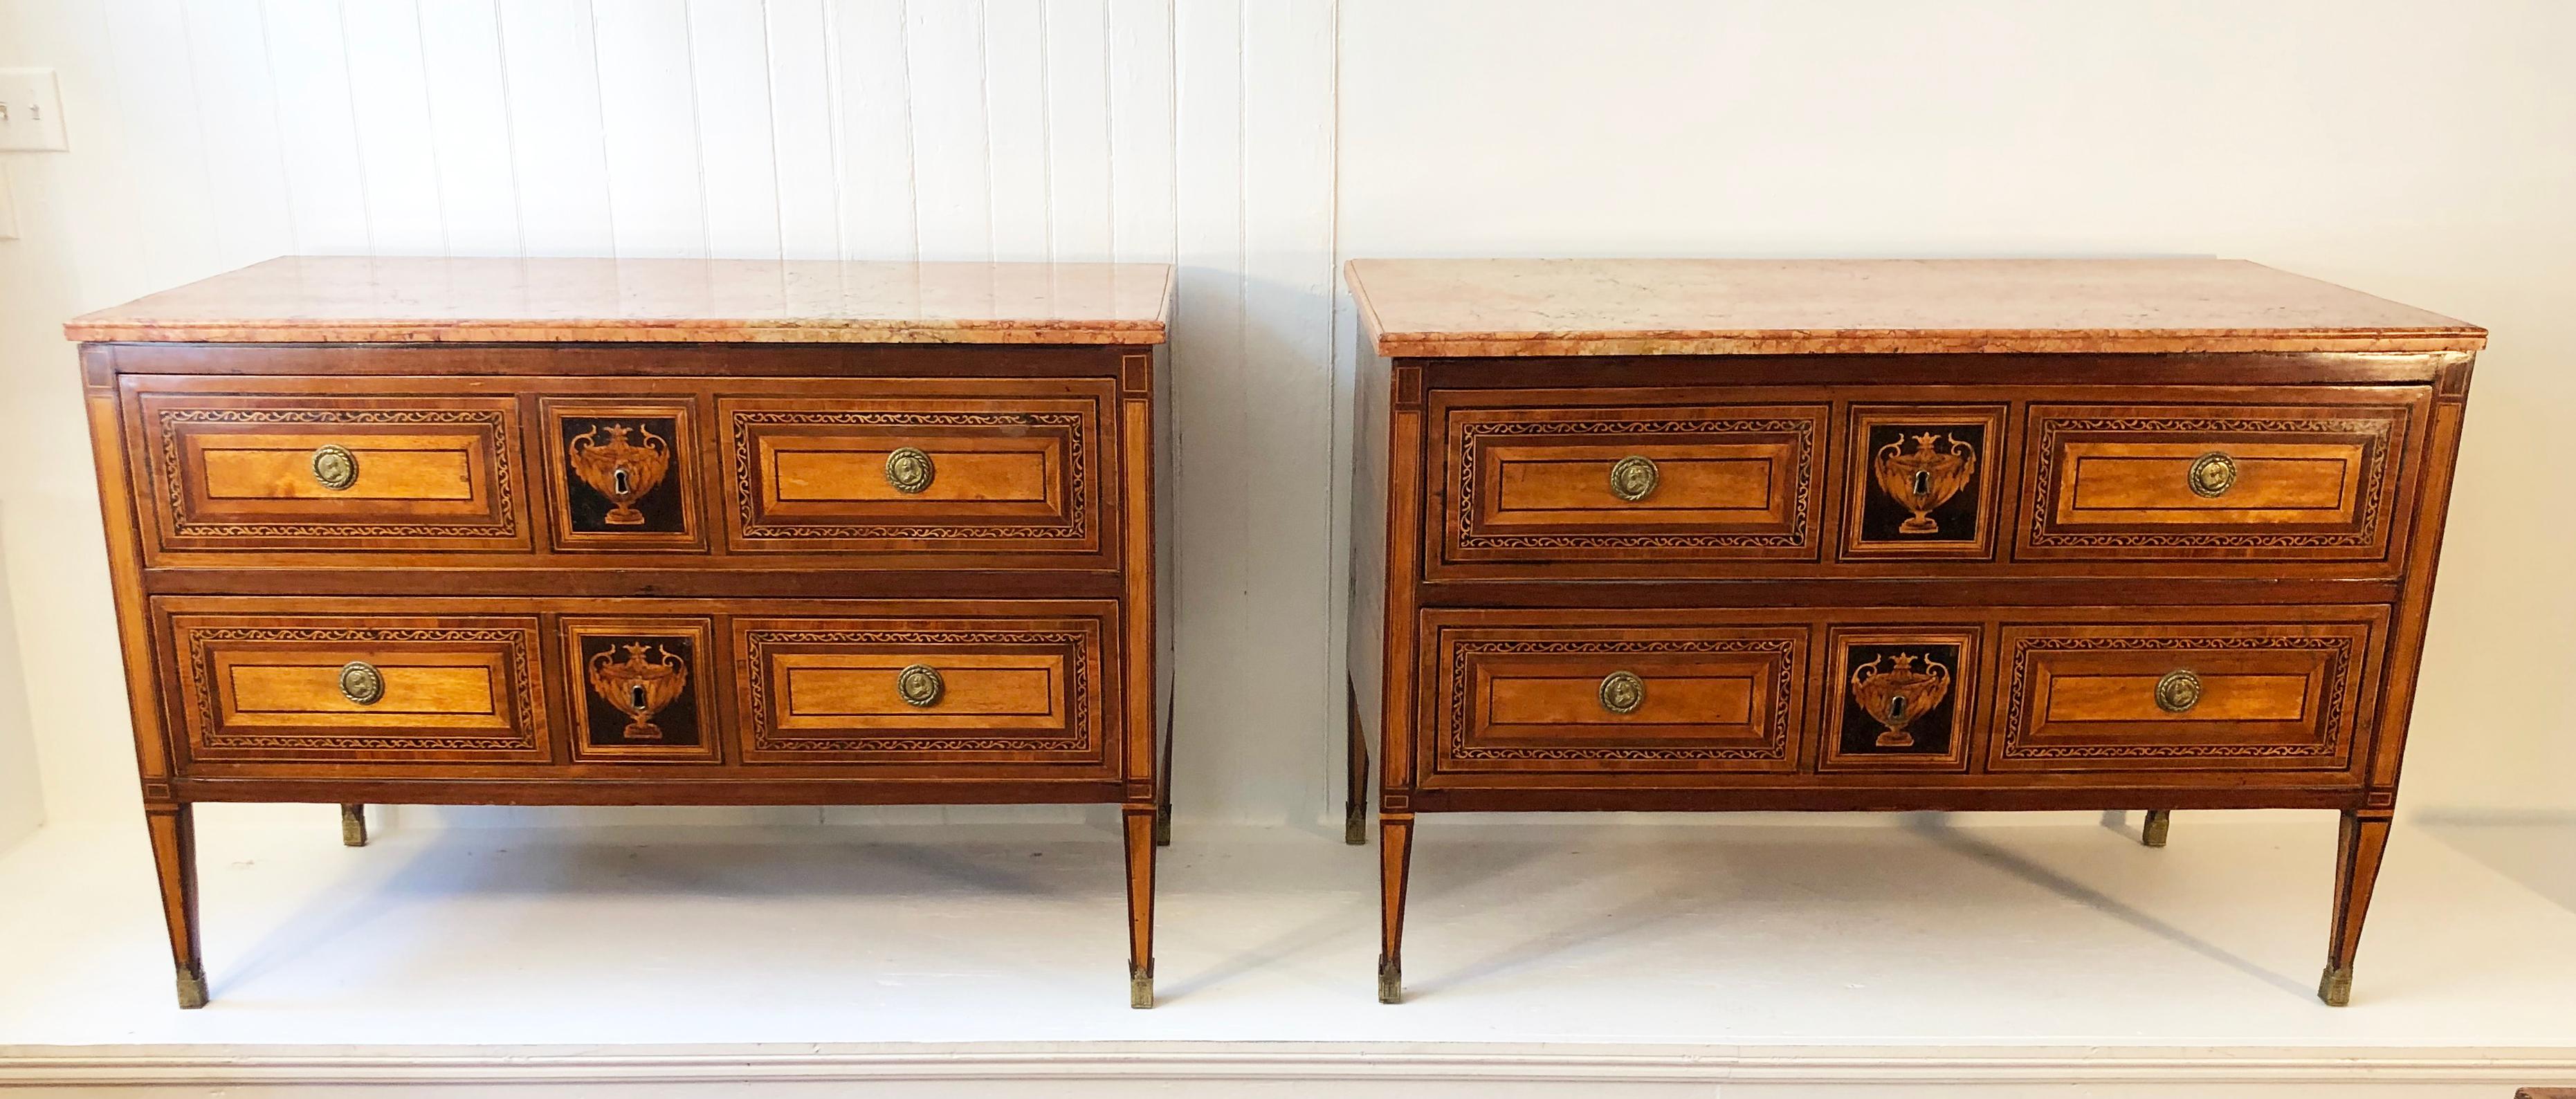 Pair of marble top two drawer commodes with mahogany, ebony, satinwood and walnut inlay. This Pair of commodes are in the manner of Giuseppe Maggiolini. The commodes are elegantly inlaid. The classic design with the drawers having a center inlaid